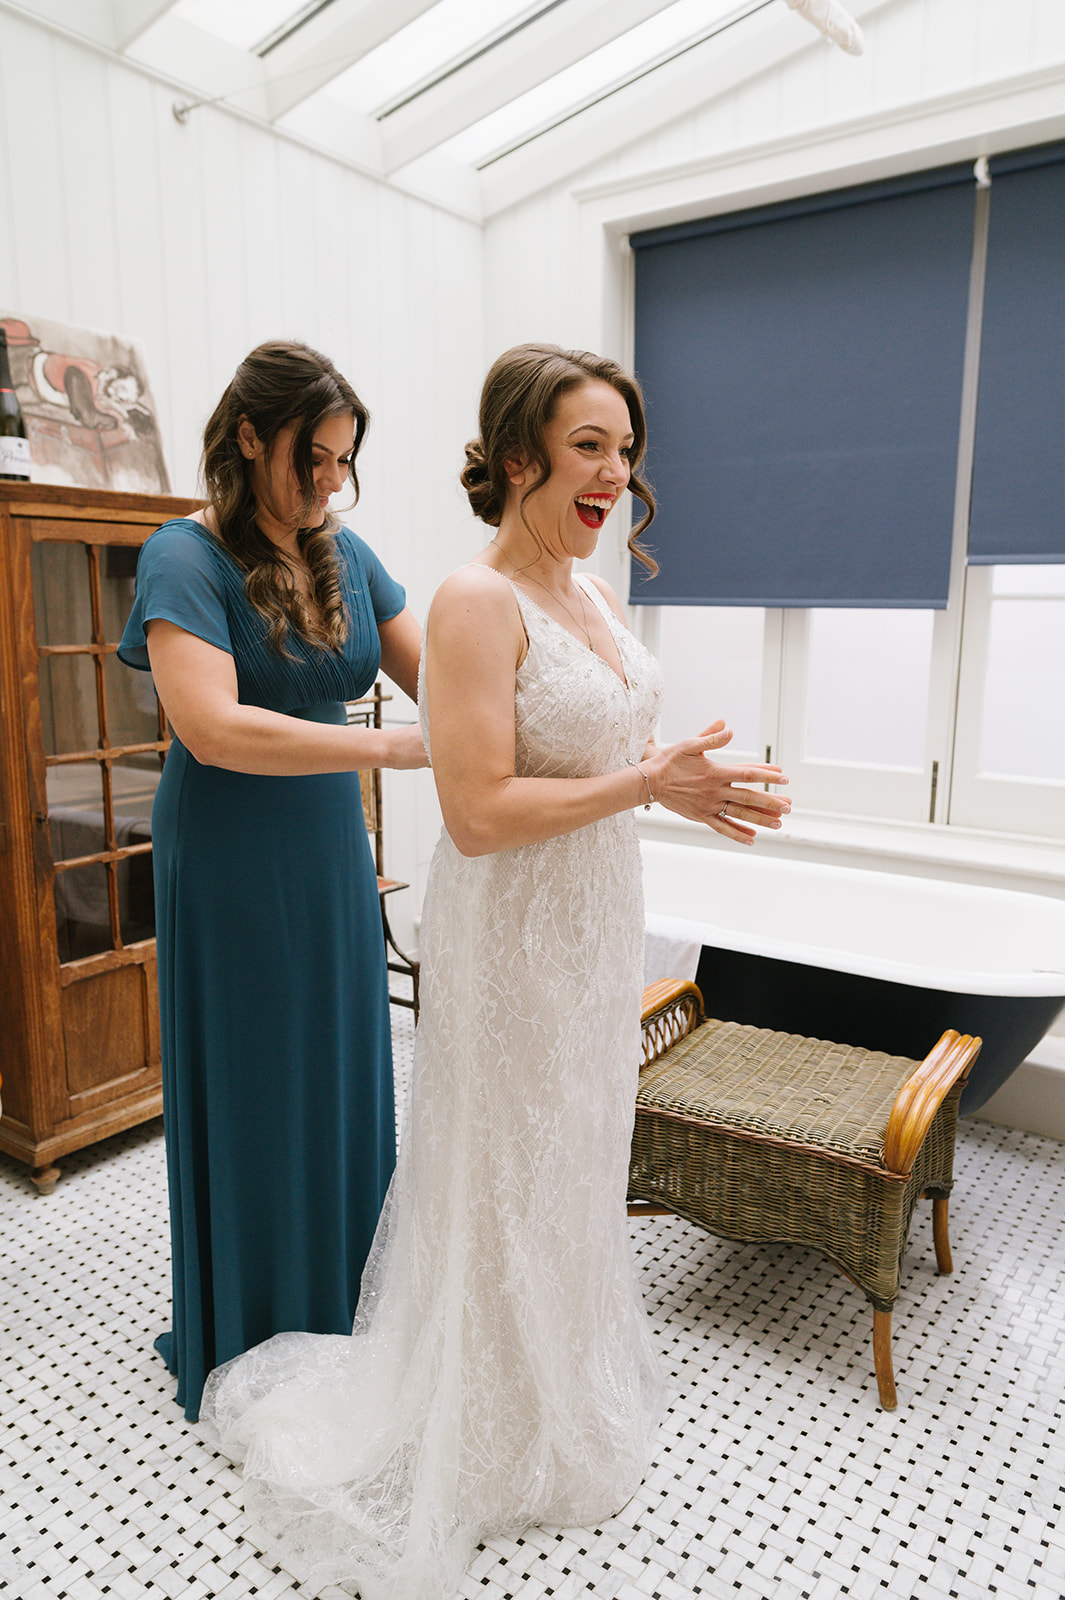 The bride and her sister get the wedding dress on in the light airy bathroom, a roll top bath in the background